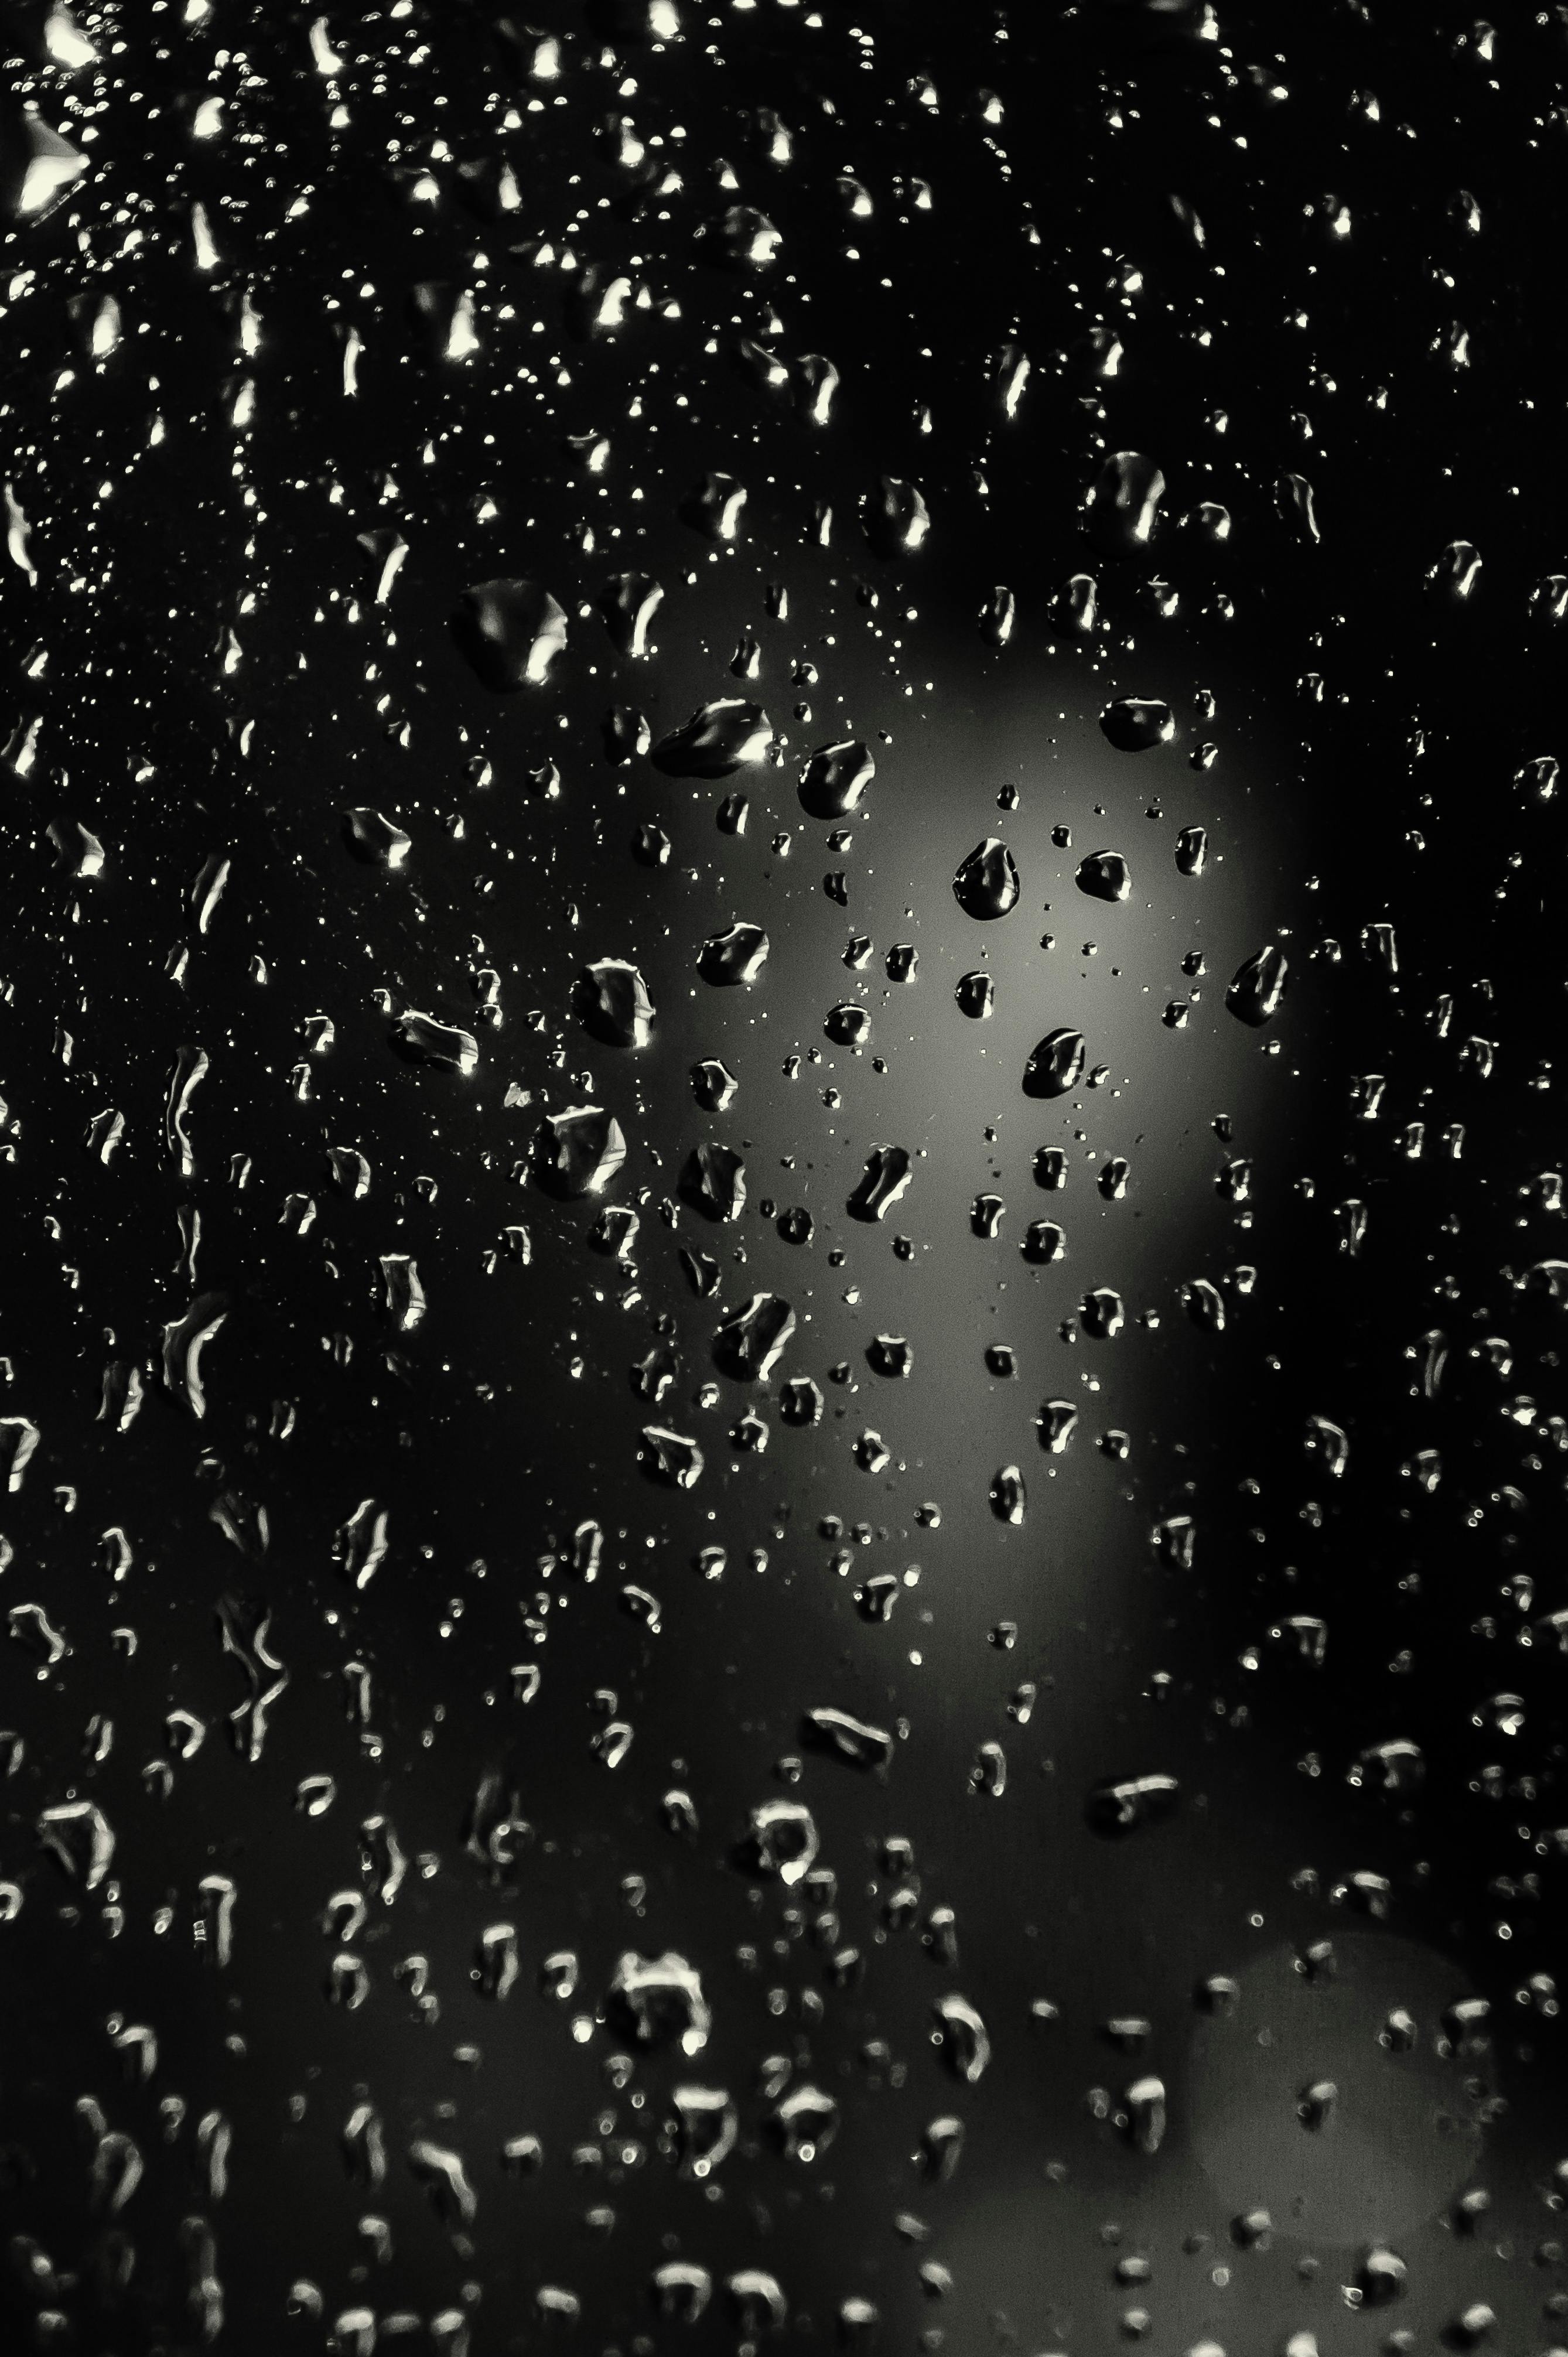 Water Drops On Color wallpaper by TheUnderoather  Download on ZEDGE  5d7c